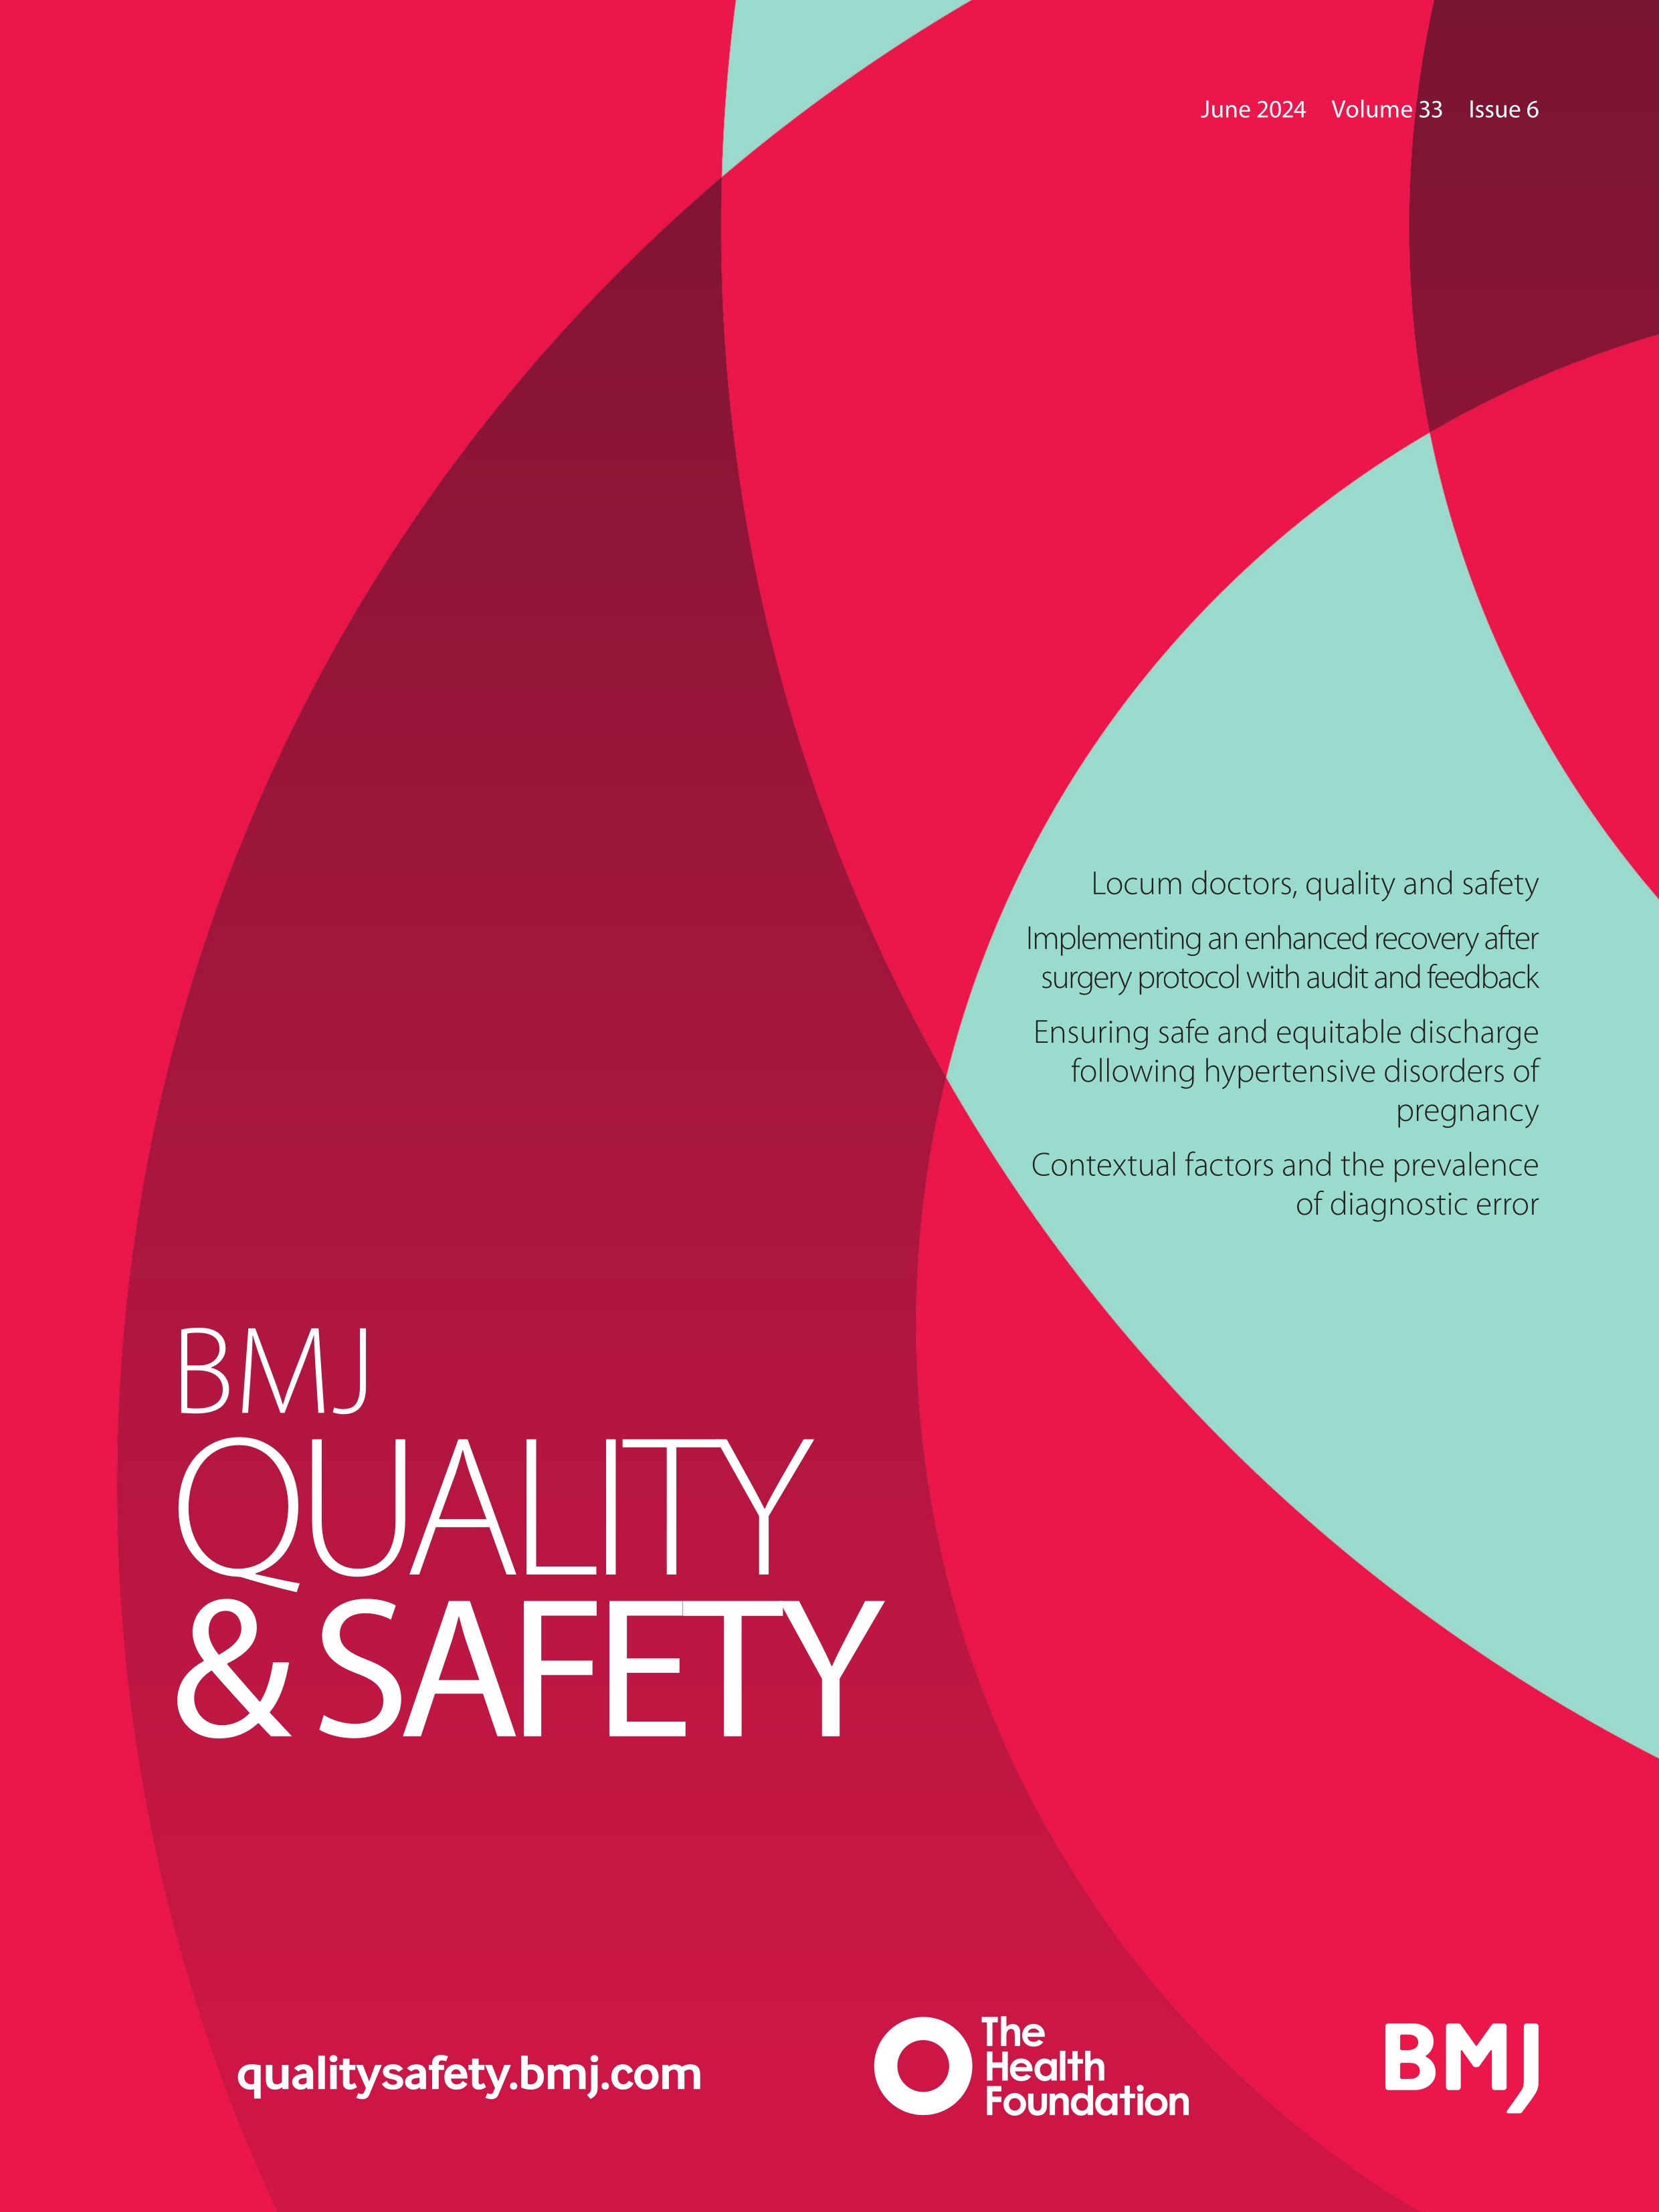 Taking action on inequities: a structural paradigm for quality and safety